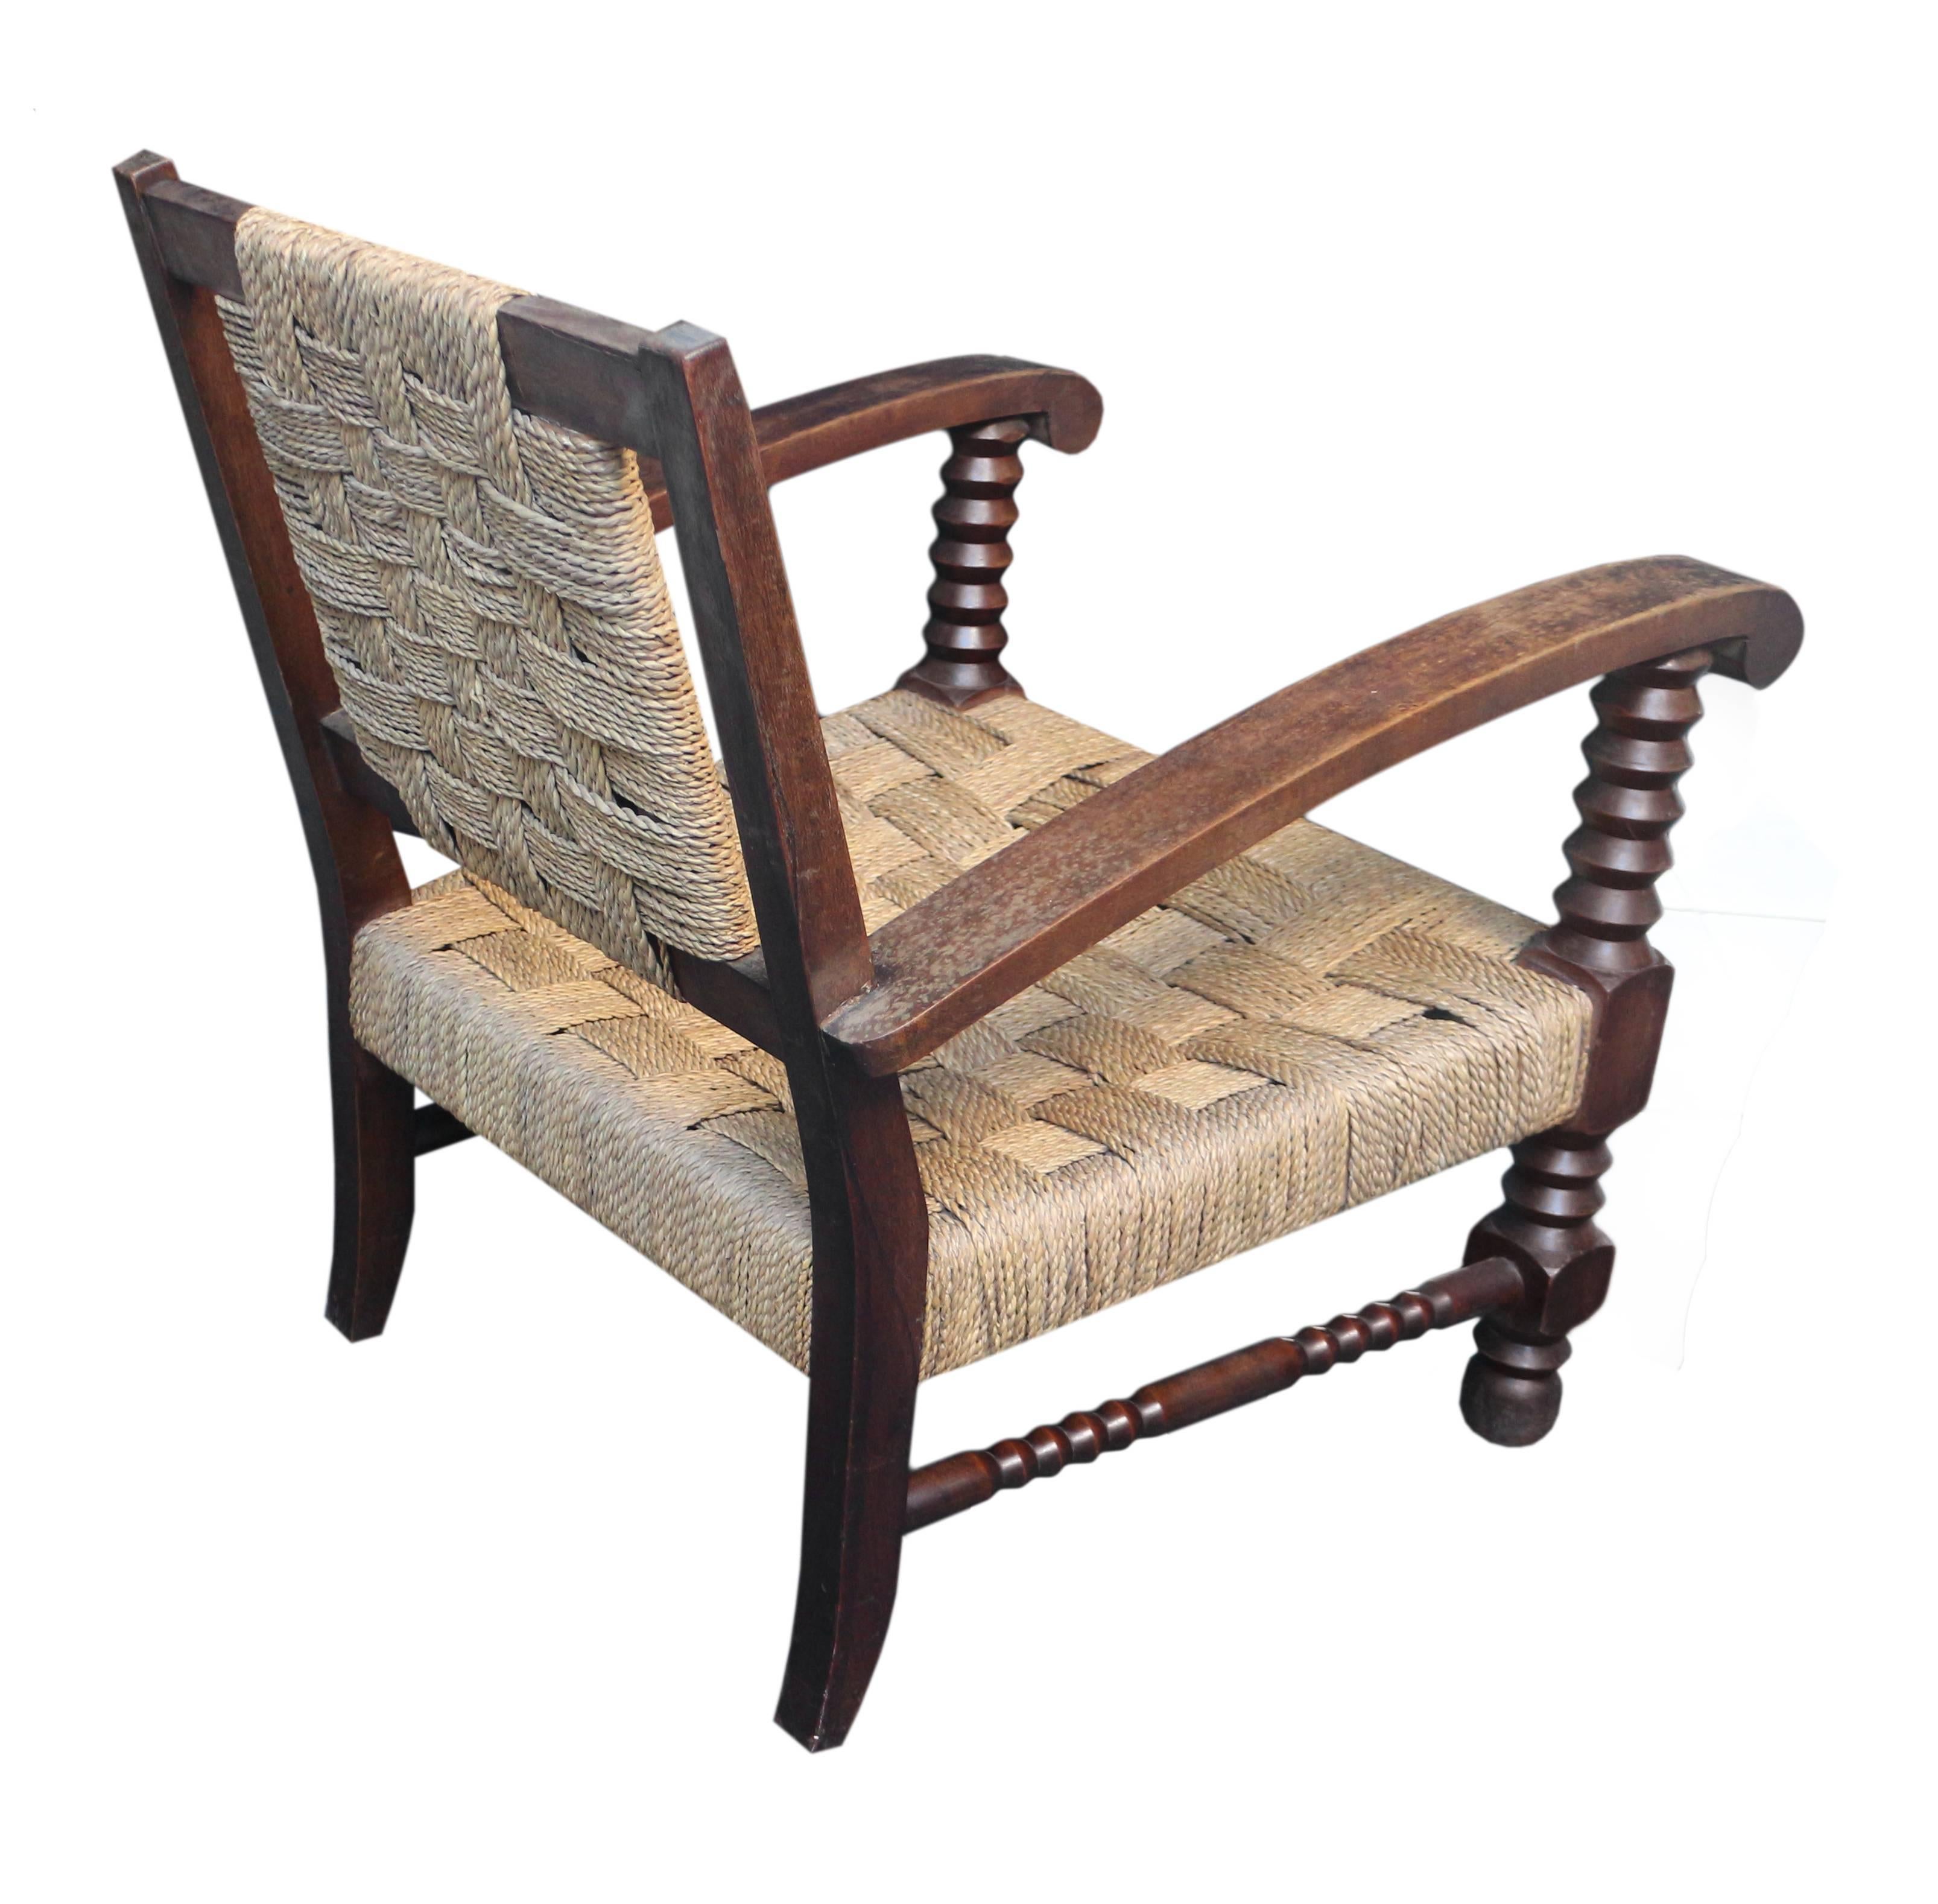 Set of three seagrass and wood lounge chairs.